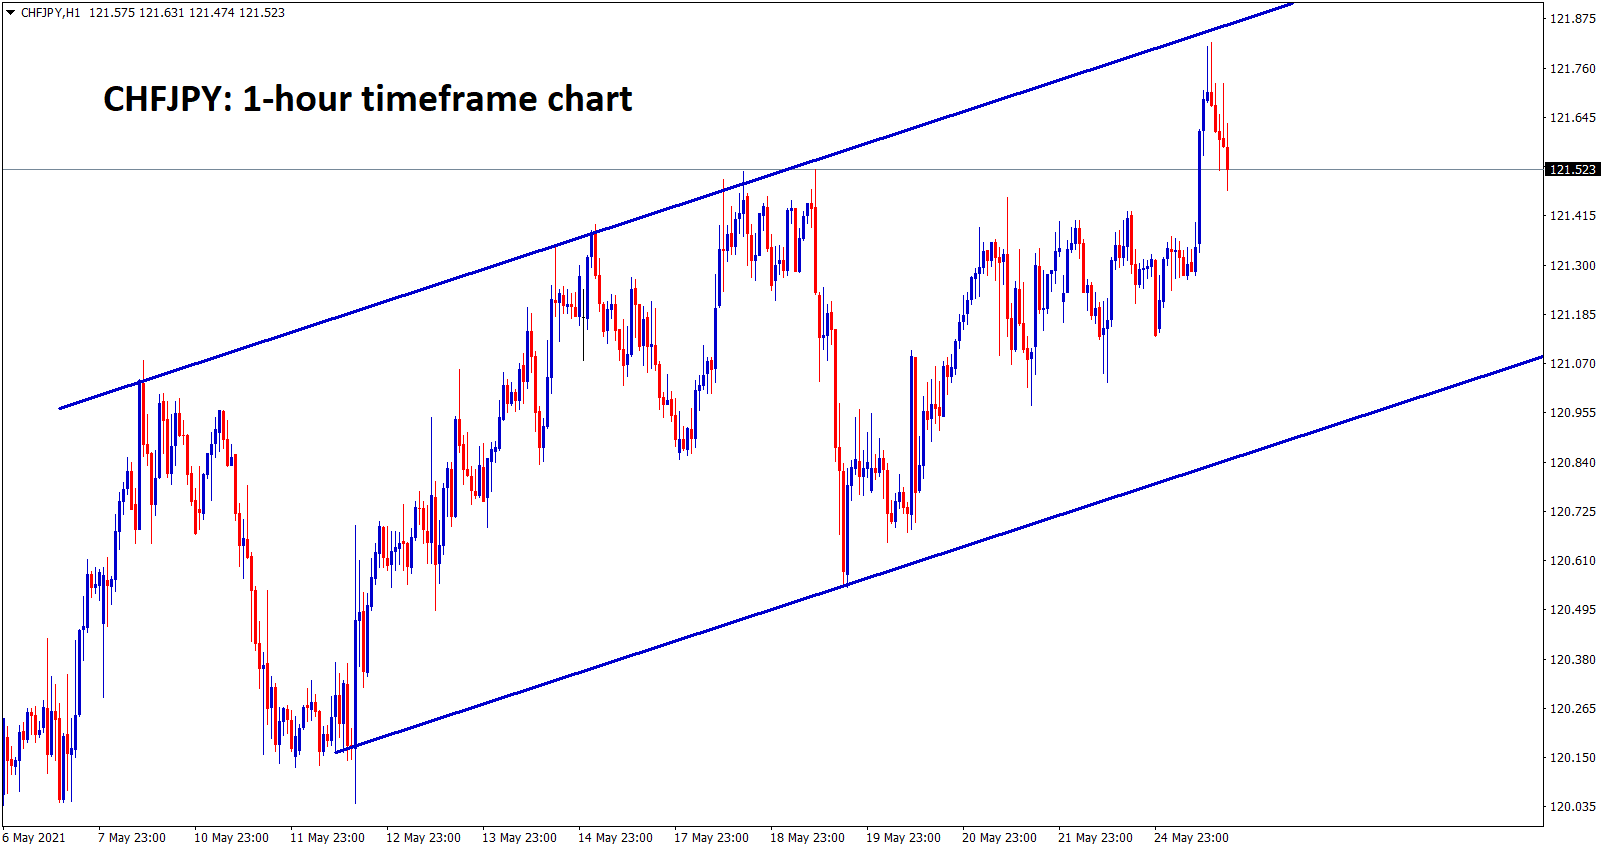 CHFJPY is moving in a strong uptrend forming an Ascending Channel